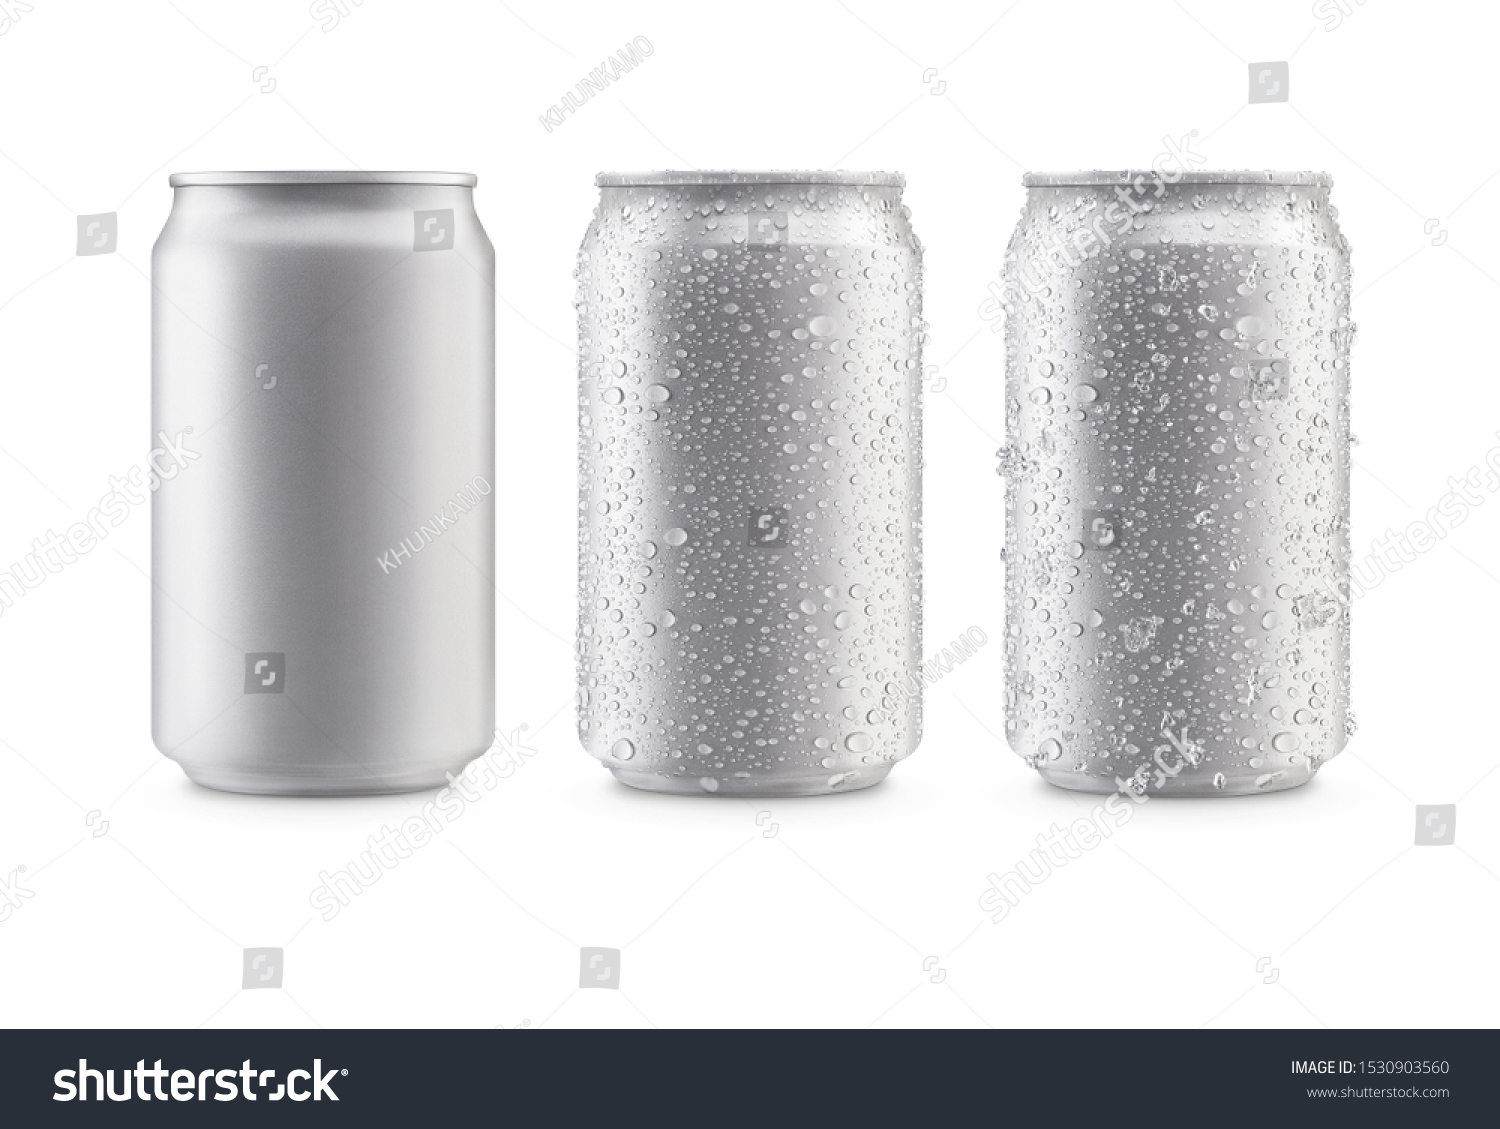 Cans in silver isolated on white background,canned with water drops,canned with water drops and ice #1530903560